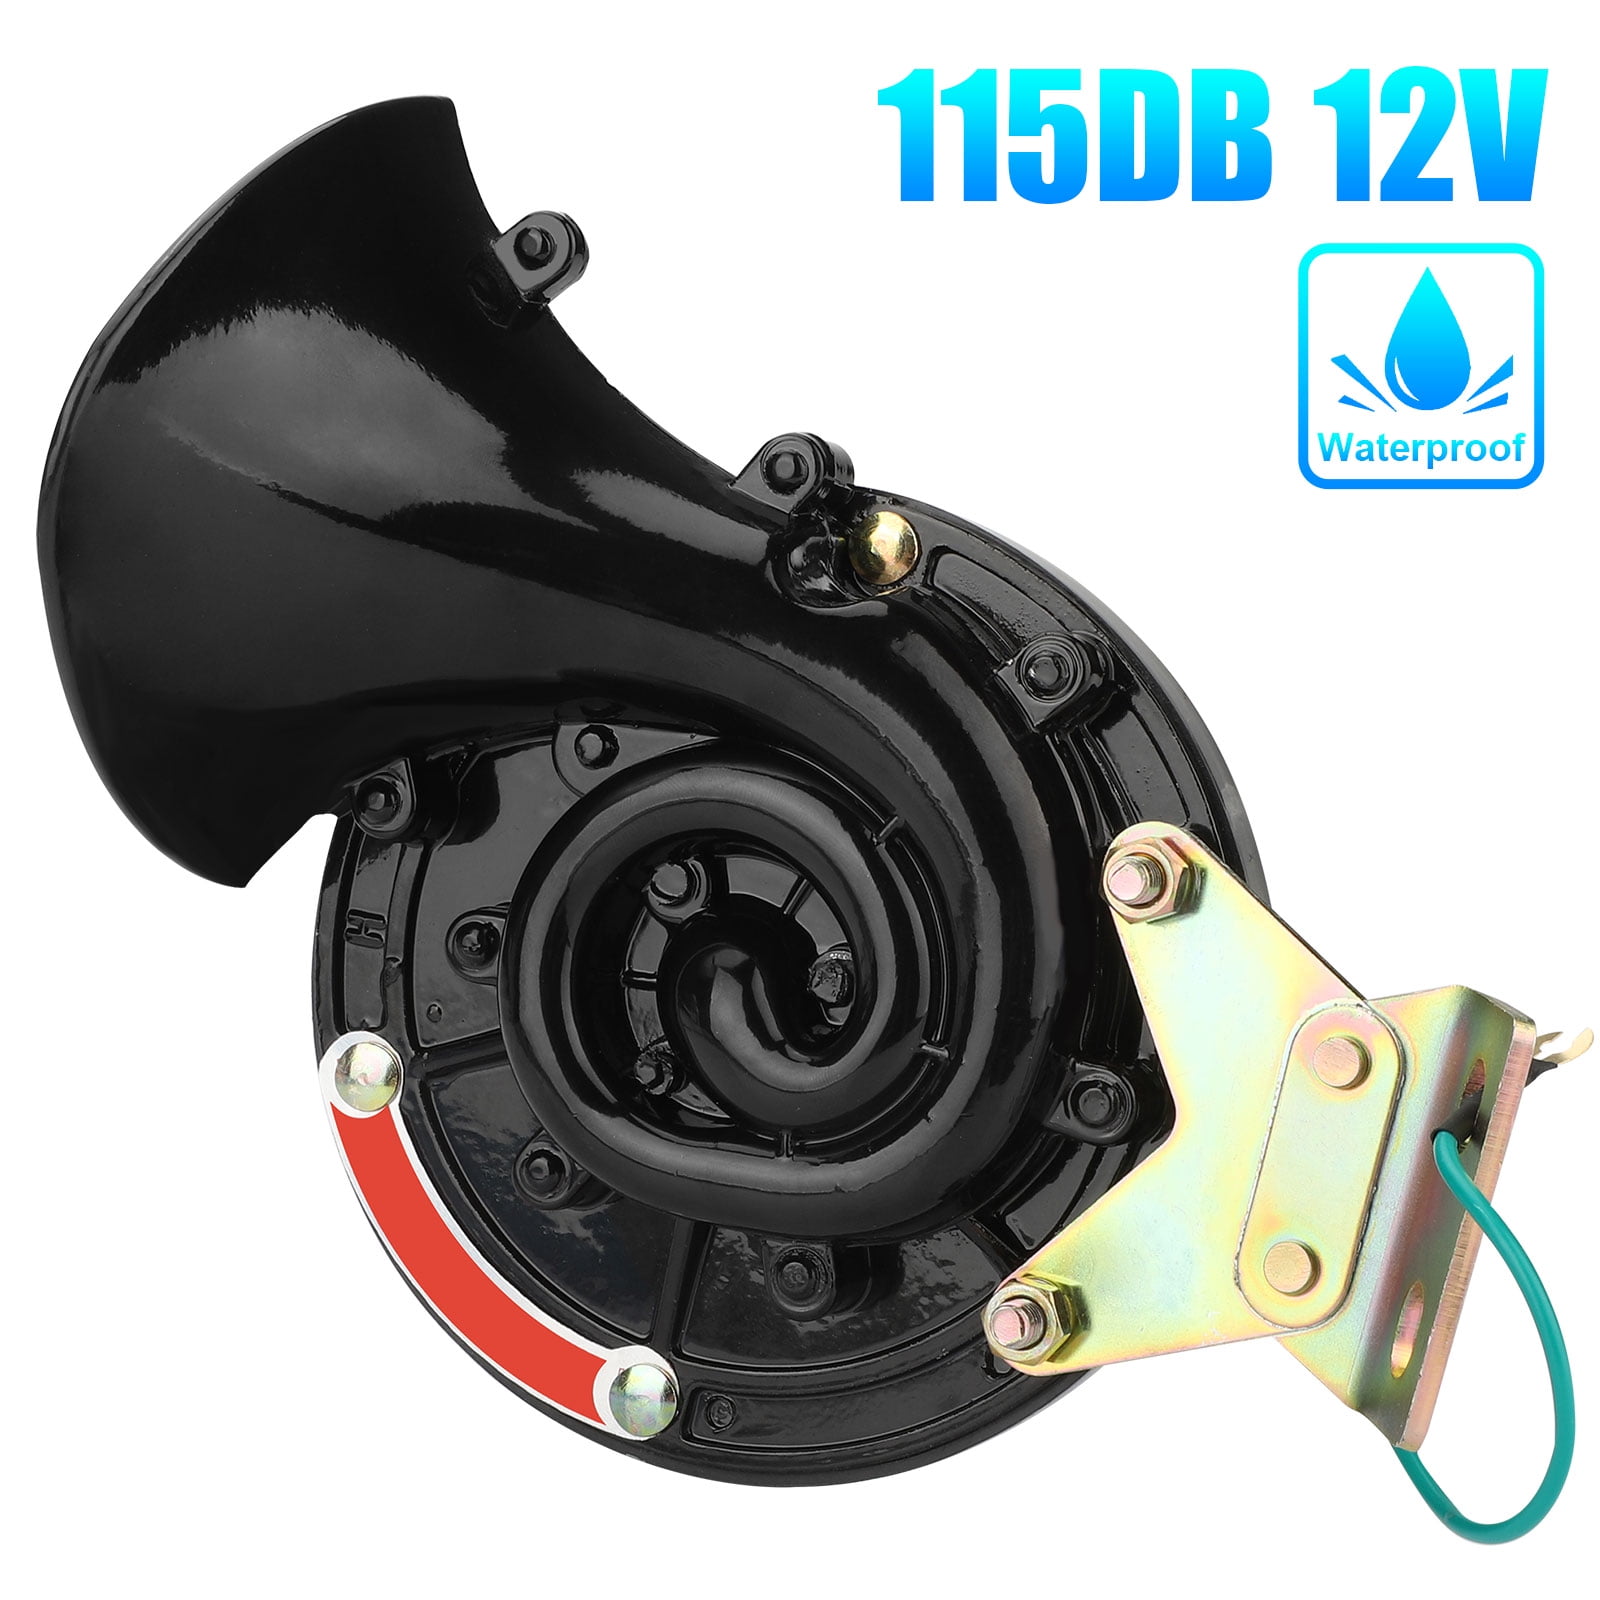 TSV 115 DB Super Loud Horn, Universal Electric Snail Horn for Truck Train  Boat Car, Air Electric Snail Single Horn, 12V Waterproof Motorcycle Snail